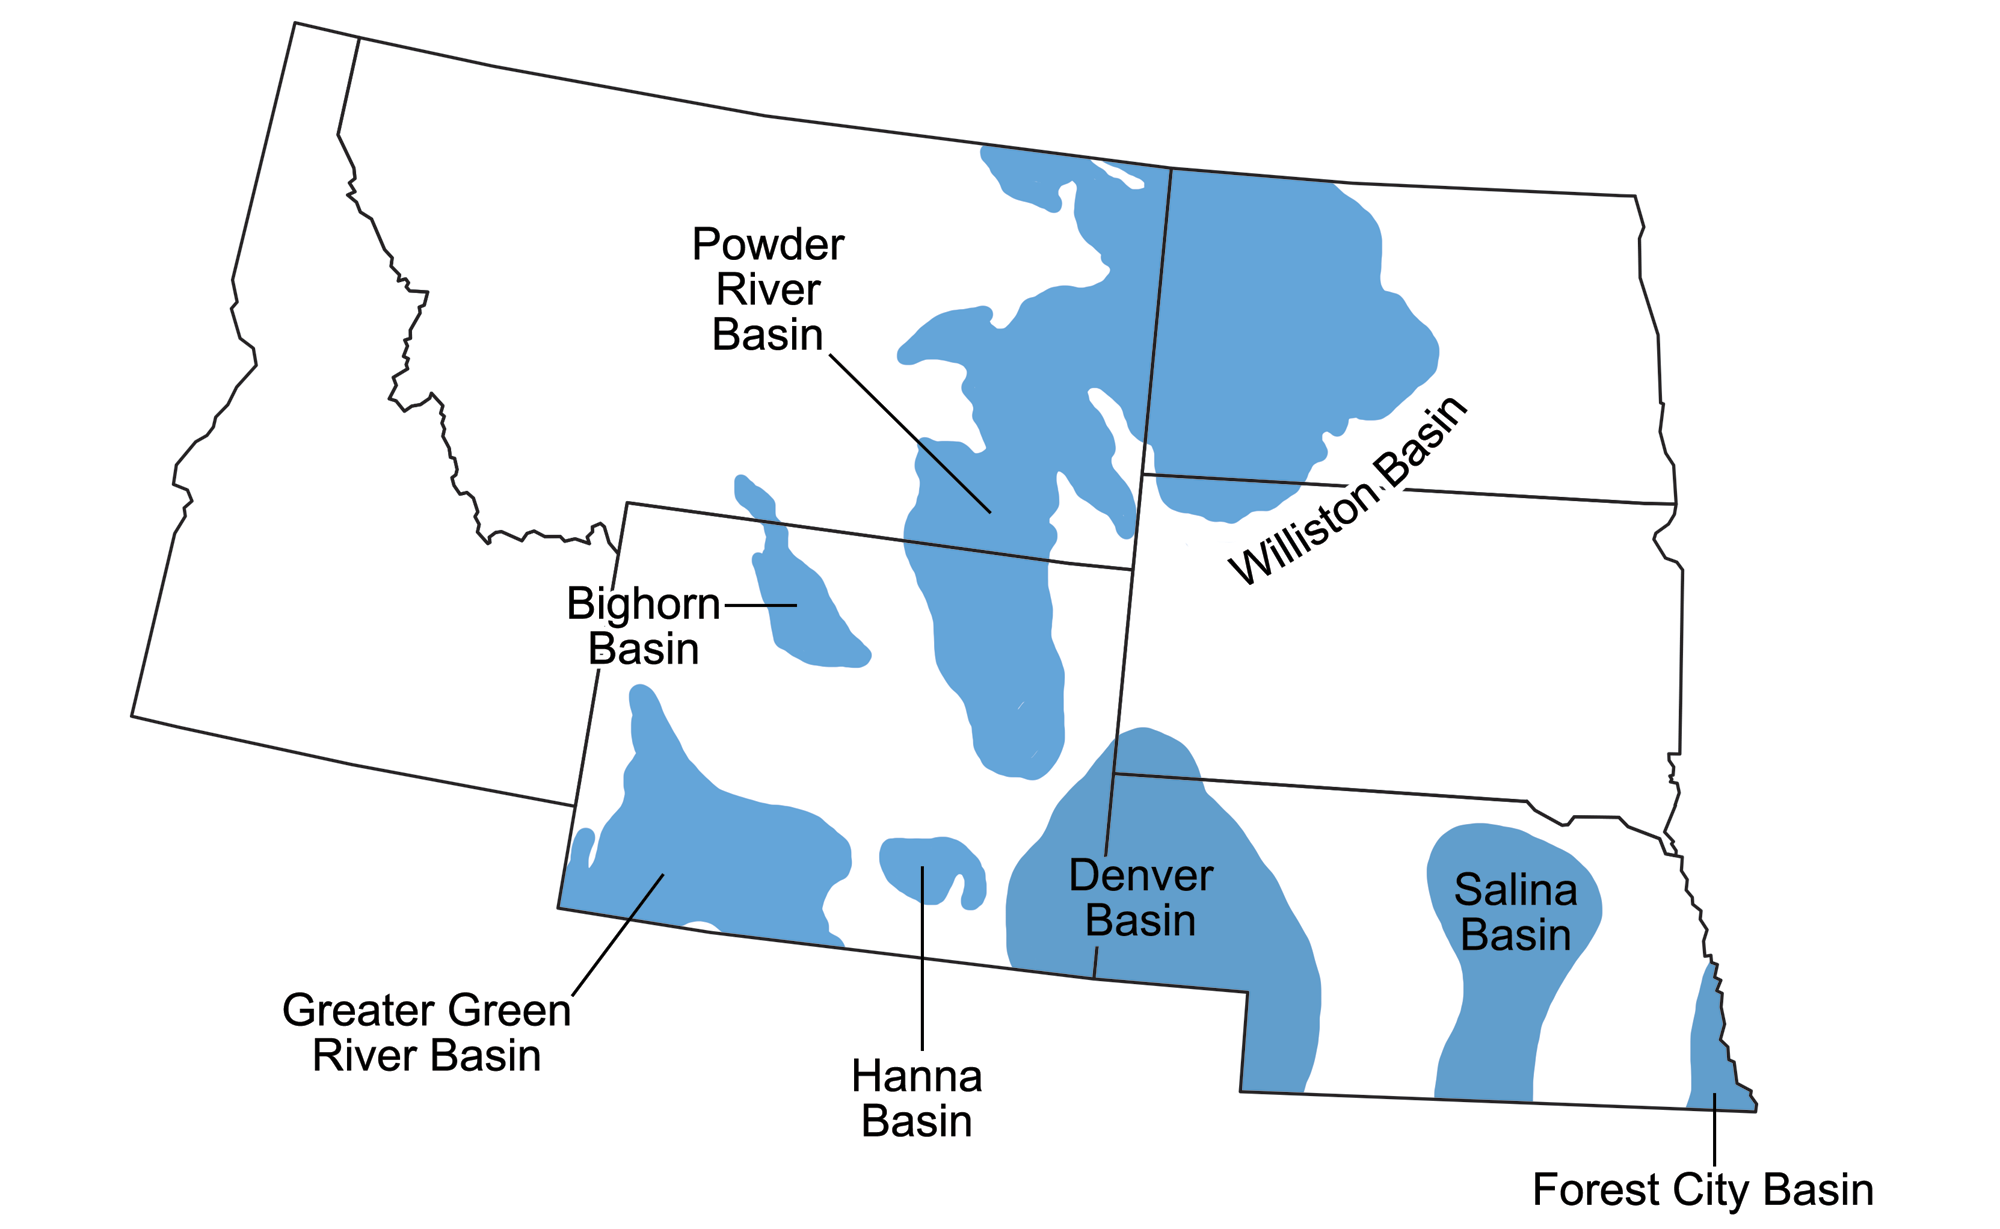 Map of the states of the northwest central region with the major sedimentary basins shaded blue. Basins include the Powder River Basin (eastern Montana, western North Dakota, northeastern Wyoming, and a little of northern South Dakota), the Bighorn Basin (southern Montana and northern Wyoming), the Greater Green River Basin (southwestern Wyoming), the Hanna Basin (southeastern Wyoming), the Denver Basin (southeastern Wyoming, western Nebraska, and southwestern South Dakota), the Salina Basin (central Nebraska), and the Forest City Basin (southeastern Nebraska).